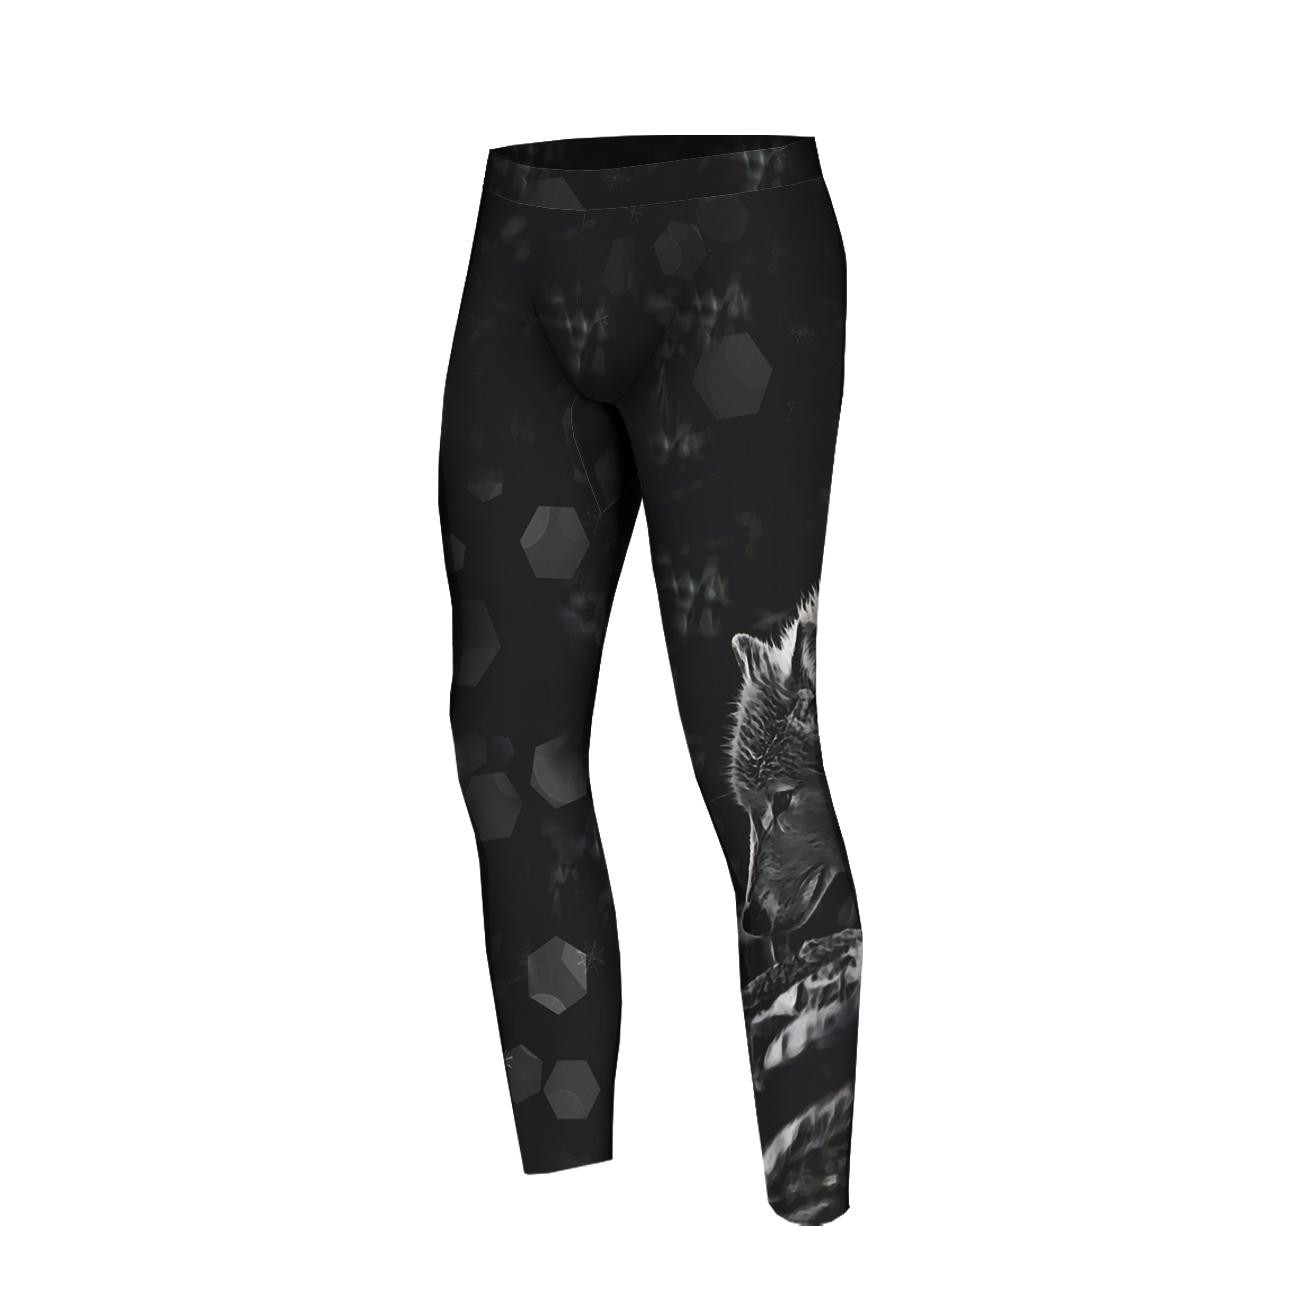 MEN’S THERMO LEGGINGS (JACK) - ARCTIC WOLF - sewing set